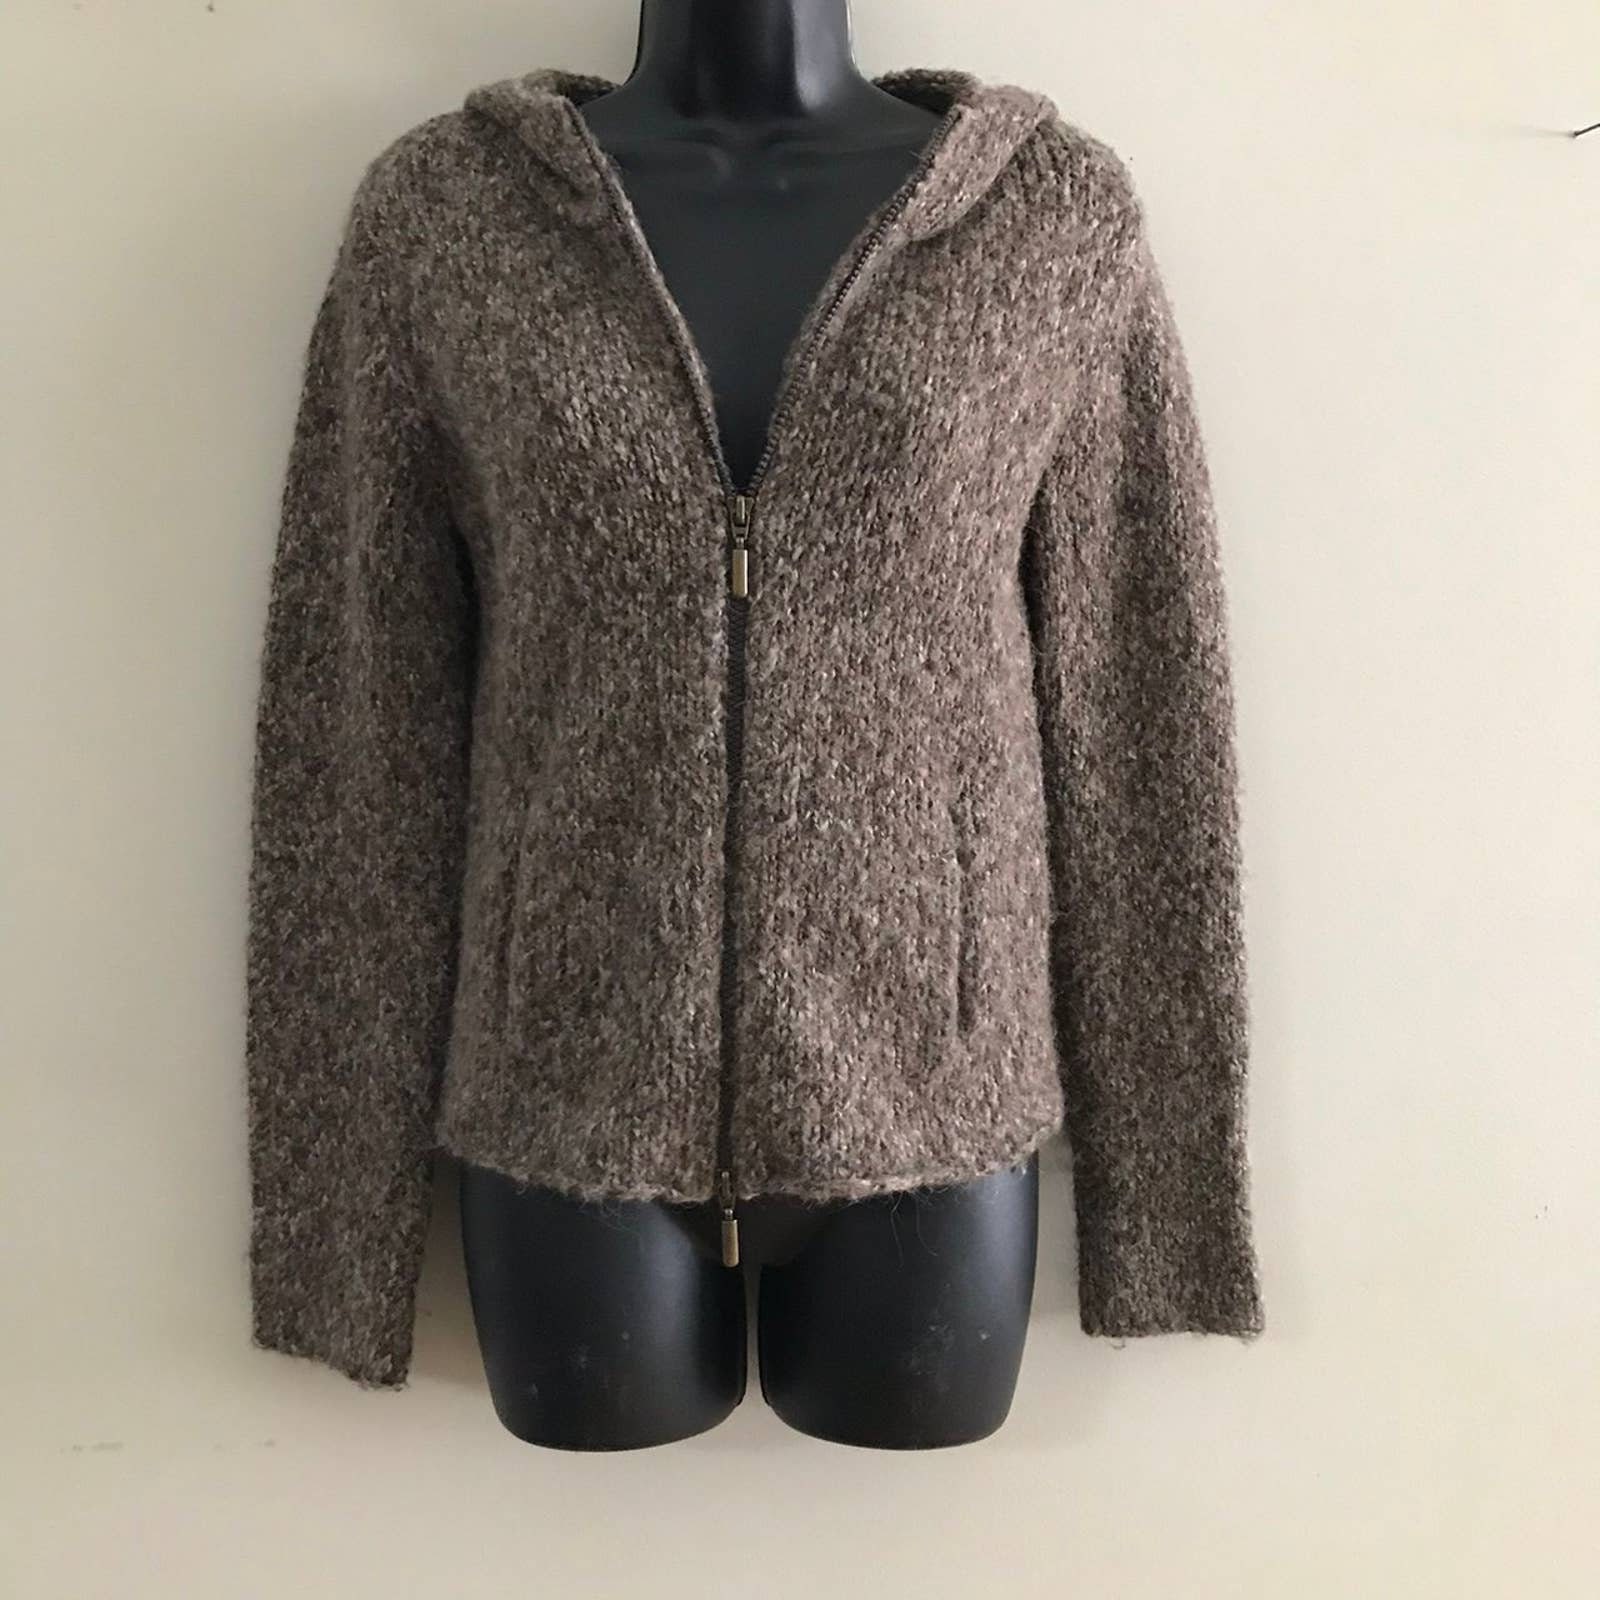 Paraphrase Wool Blend Sweatshirt Hoodie in A Soft Heathered Brown, Size Petite Small, Small Sweater, Zip Up Sweater